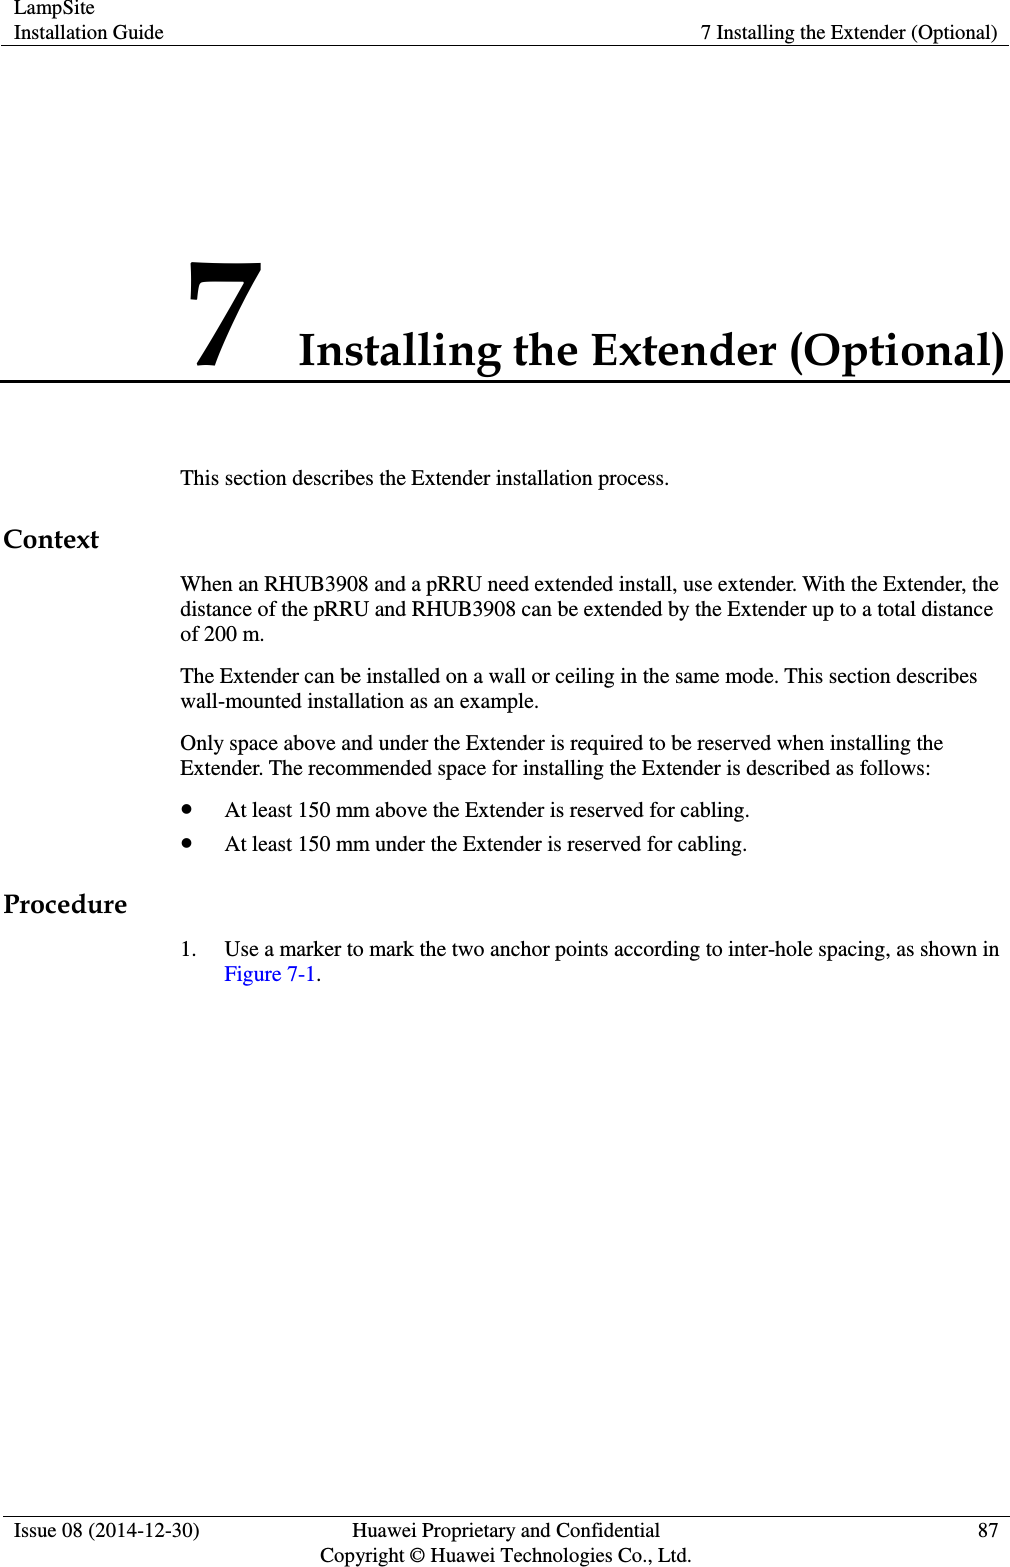 LampSite Installation Guide 7 Installing the Extender (Optional)  Issue 08 (2014-12-30) Huawei Proprietary and Confidential                                     Copyright © Huawei Technologies Co., Ltd. 87  7 Installing the Extender (Optional) This section describes the Extender installation process. Context When an RHUB3908 and a pRRU need extended install, use extender. With the Extender, the distance of the pRRU and RHUB3908 can be extended by the Extender up to a total distance of 200 m. The Extender can be installed on a wall or ceiling in the same mode. This section describes wall-mounted installation as an example. Only space above and under the Extender is required to be reserved when installing the Extender. The recommended space for installing the Extender is described as follows:  At least 150 mm above the Extender is reserved for cabling.  At least 150 mm under the Extender is reserved for cabling. Procedure 1. Use a marker to mark the two anchor points according to inter-hole spacing, as shown in Figure 7-1. 